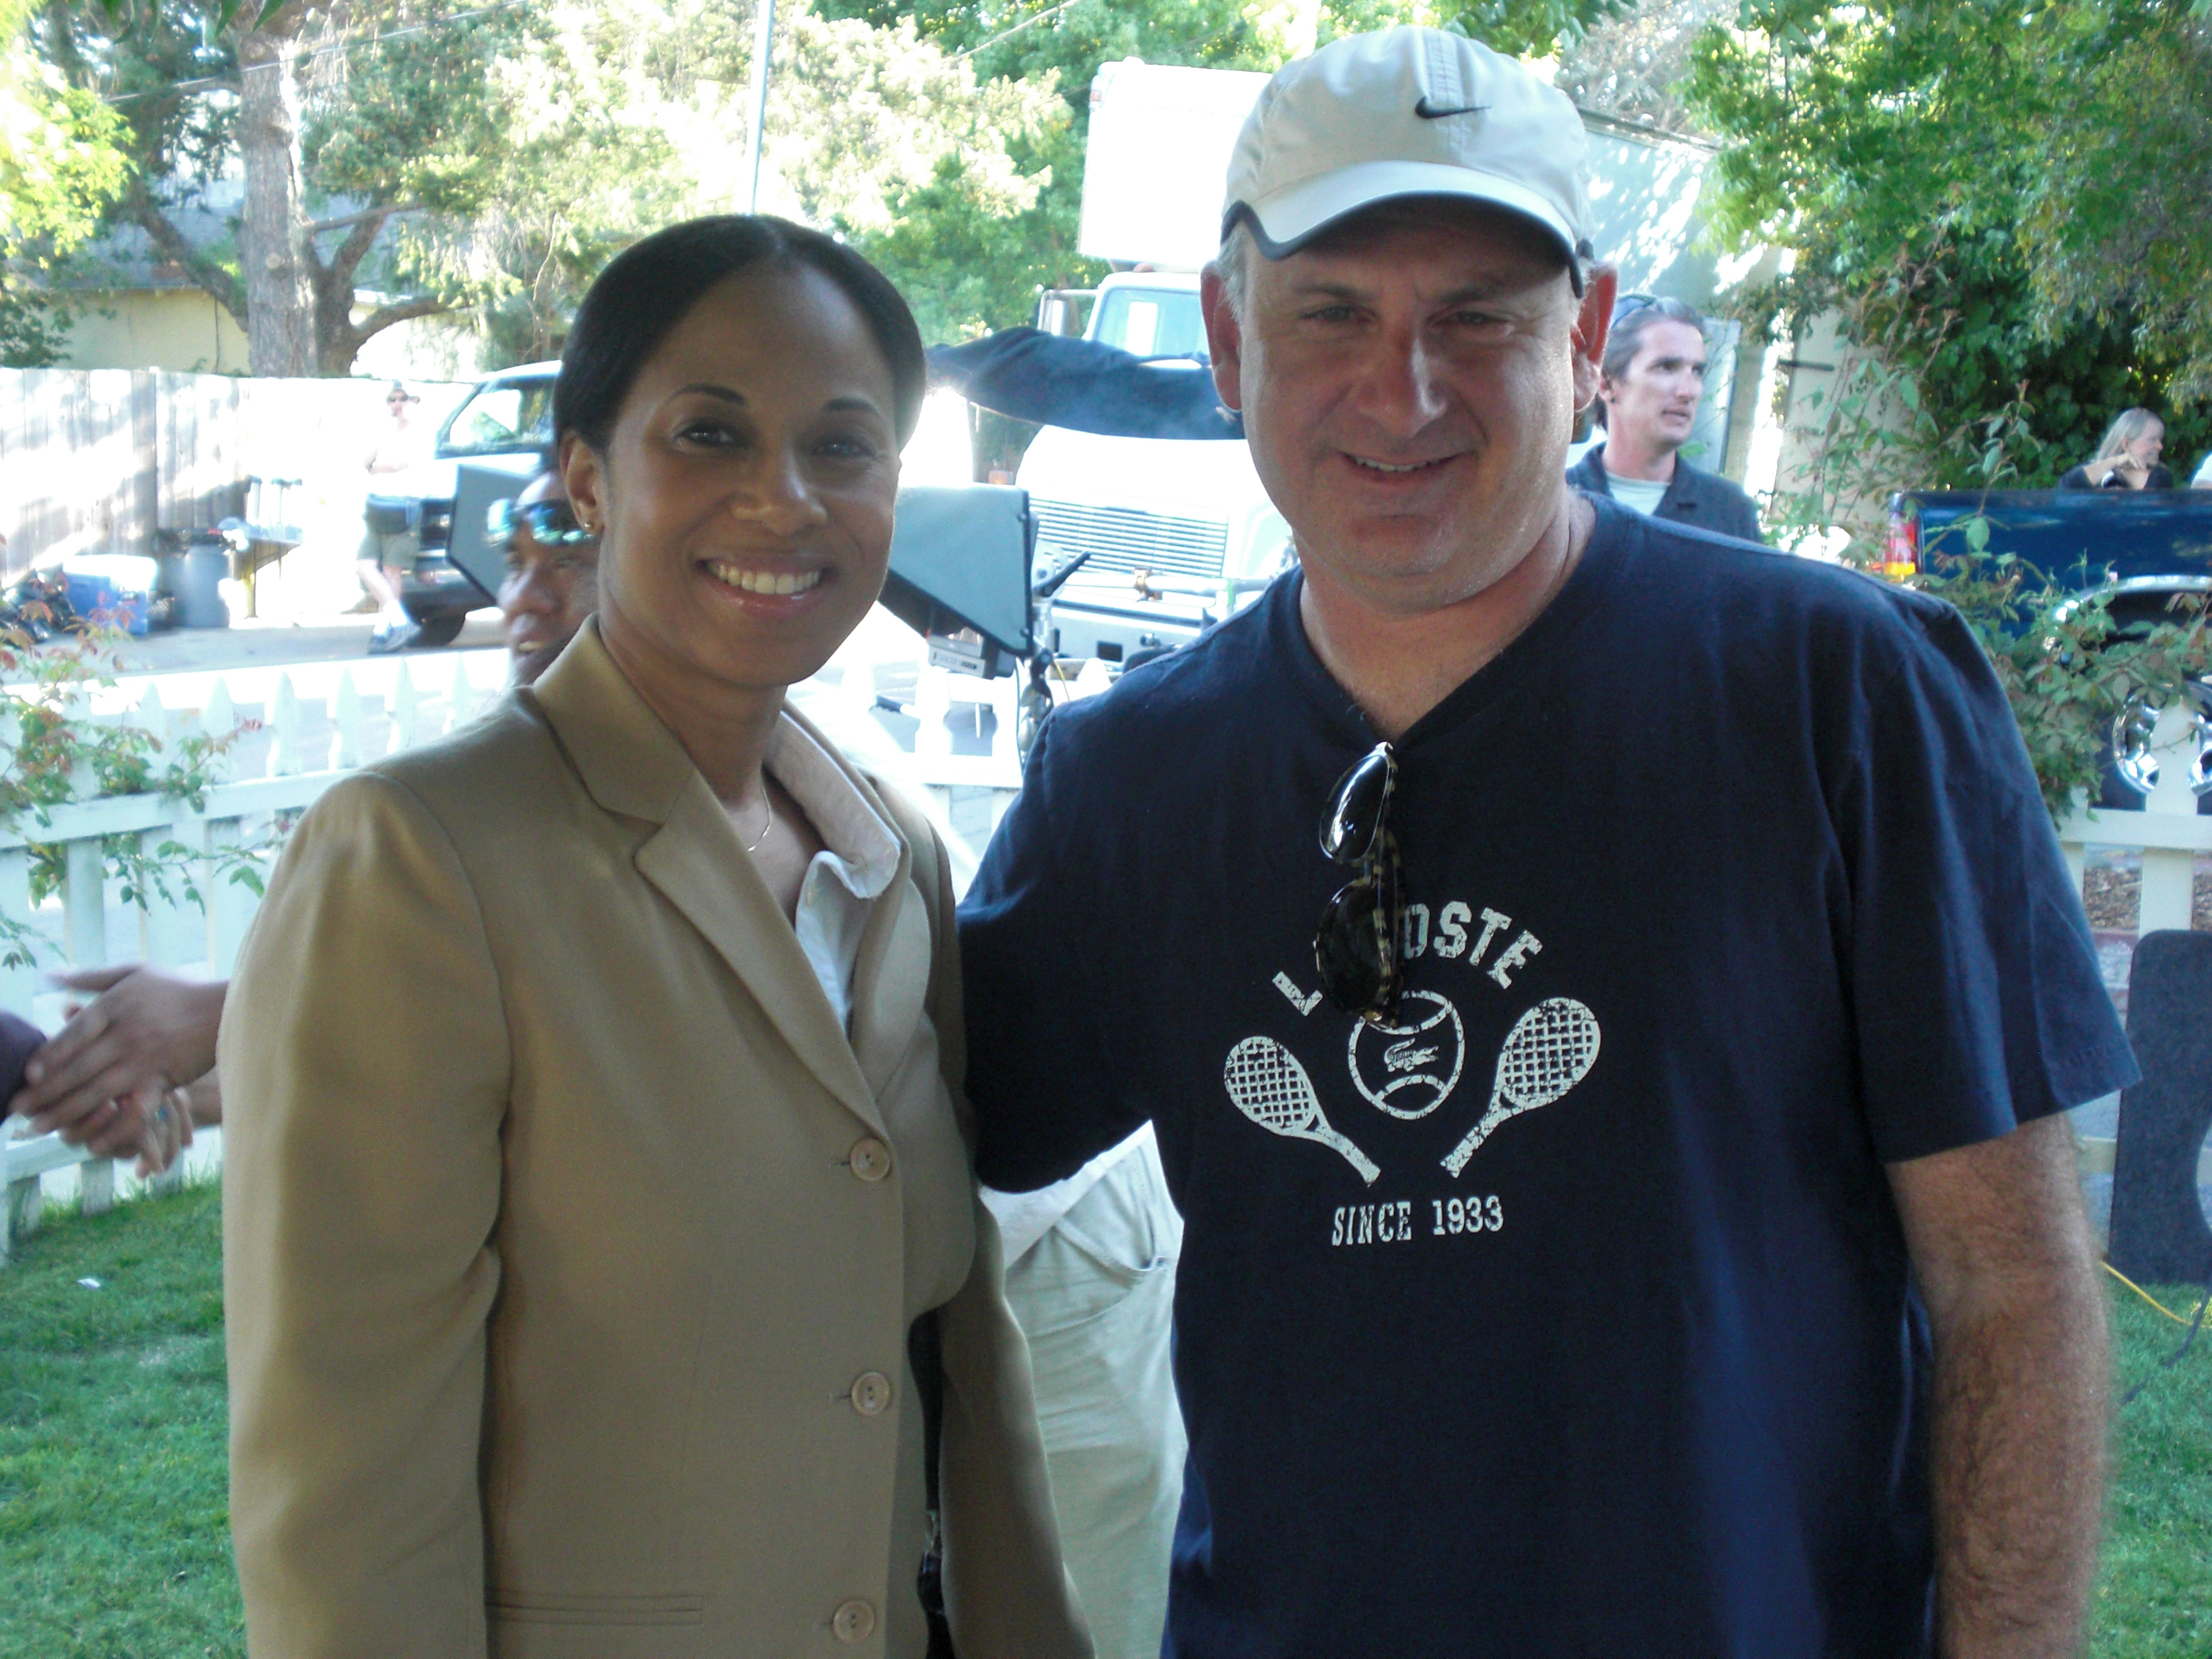 Veronica Loud (as Child Protection Services Officer) with supervising producer Greg Klein on location for the Fox television series 